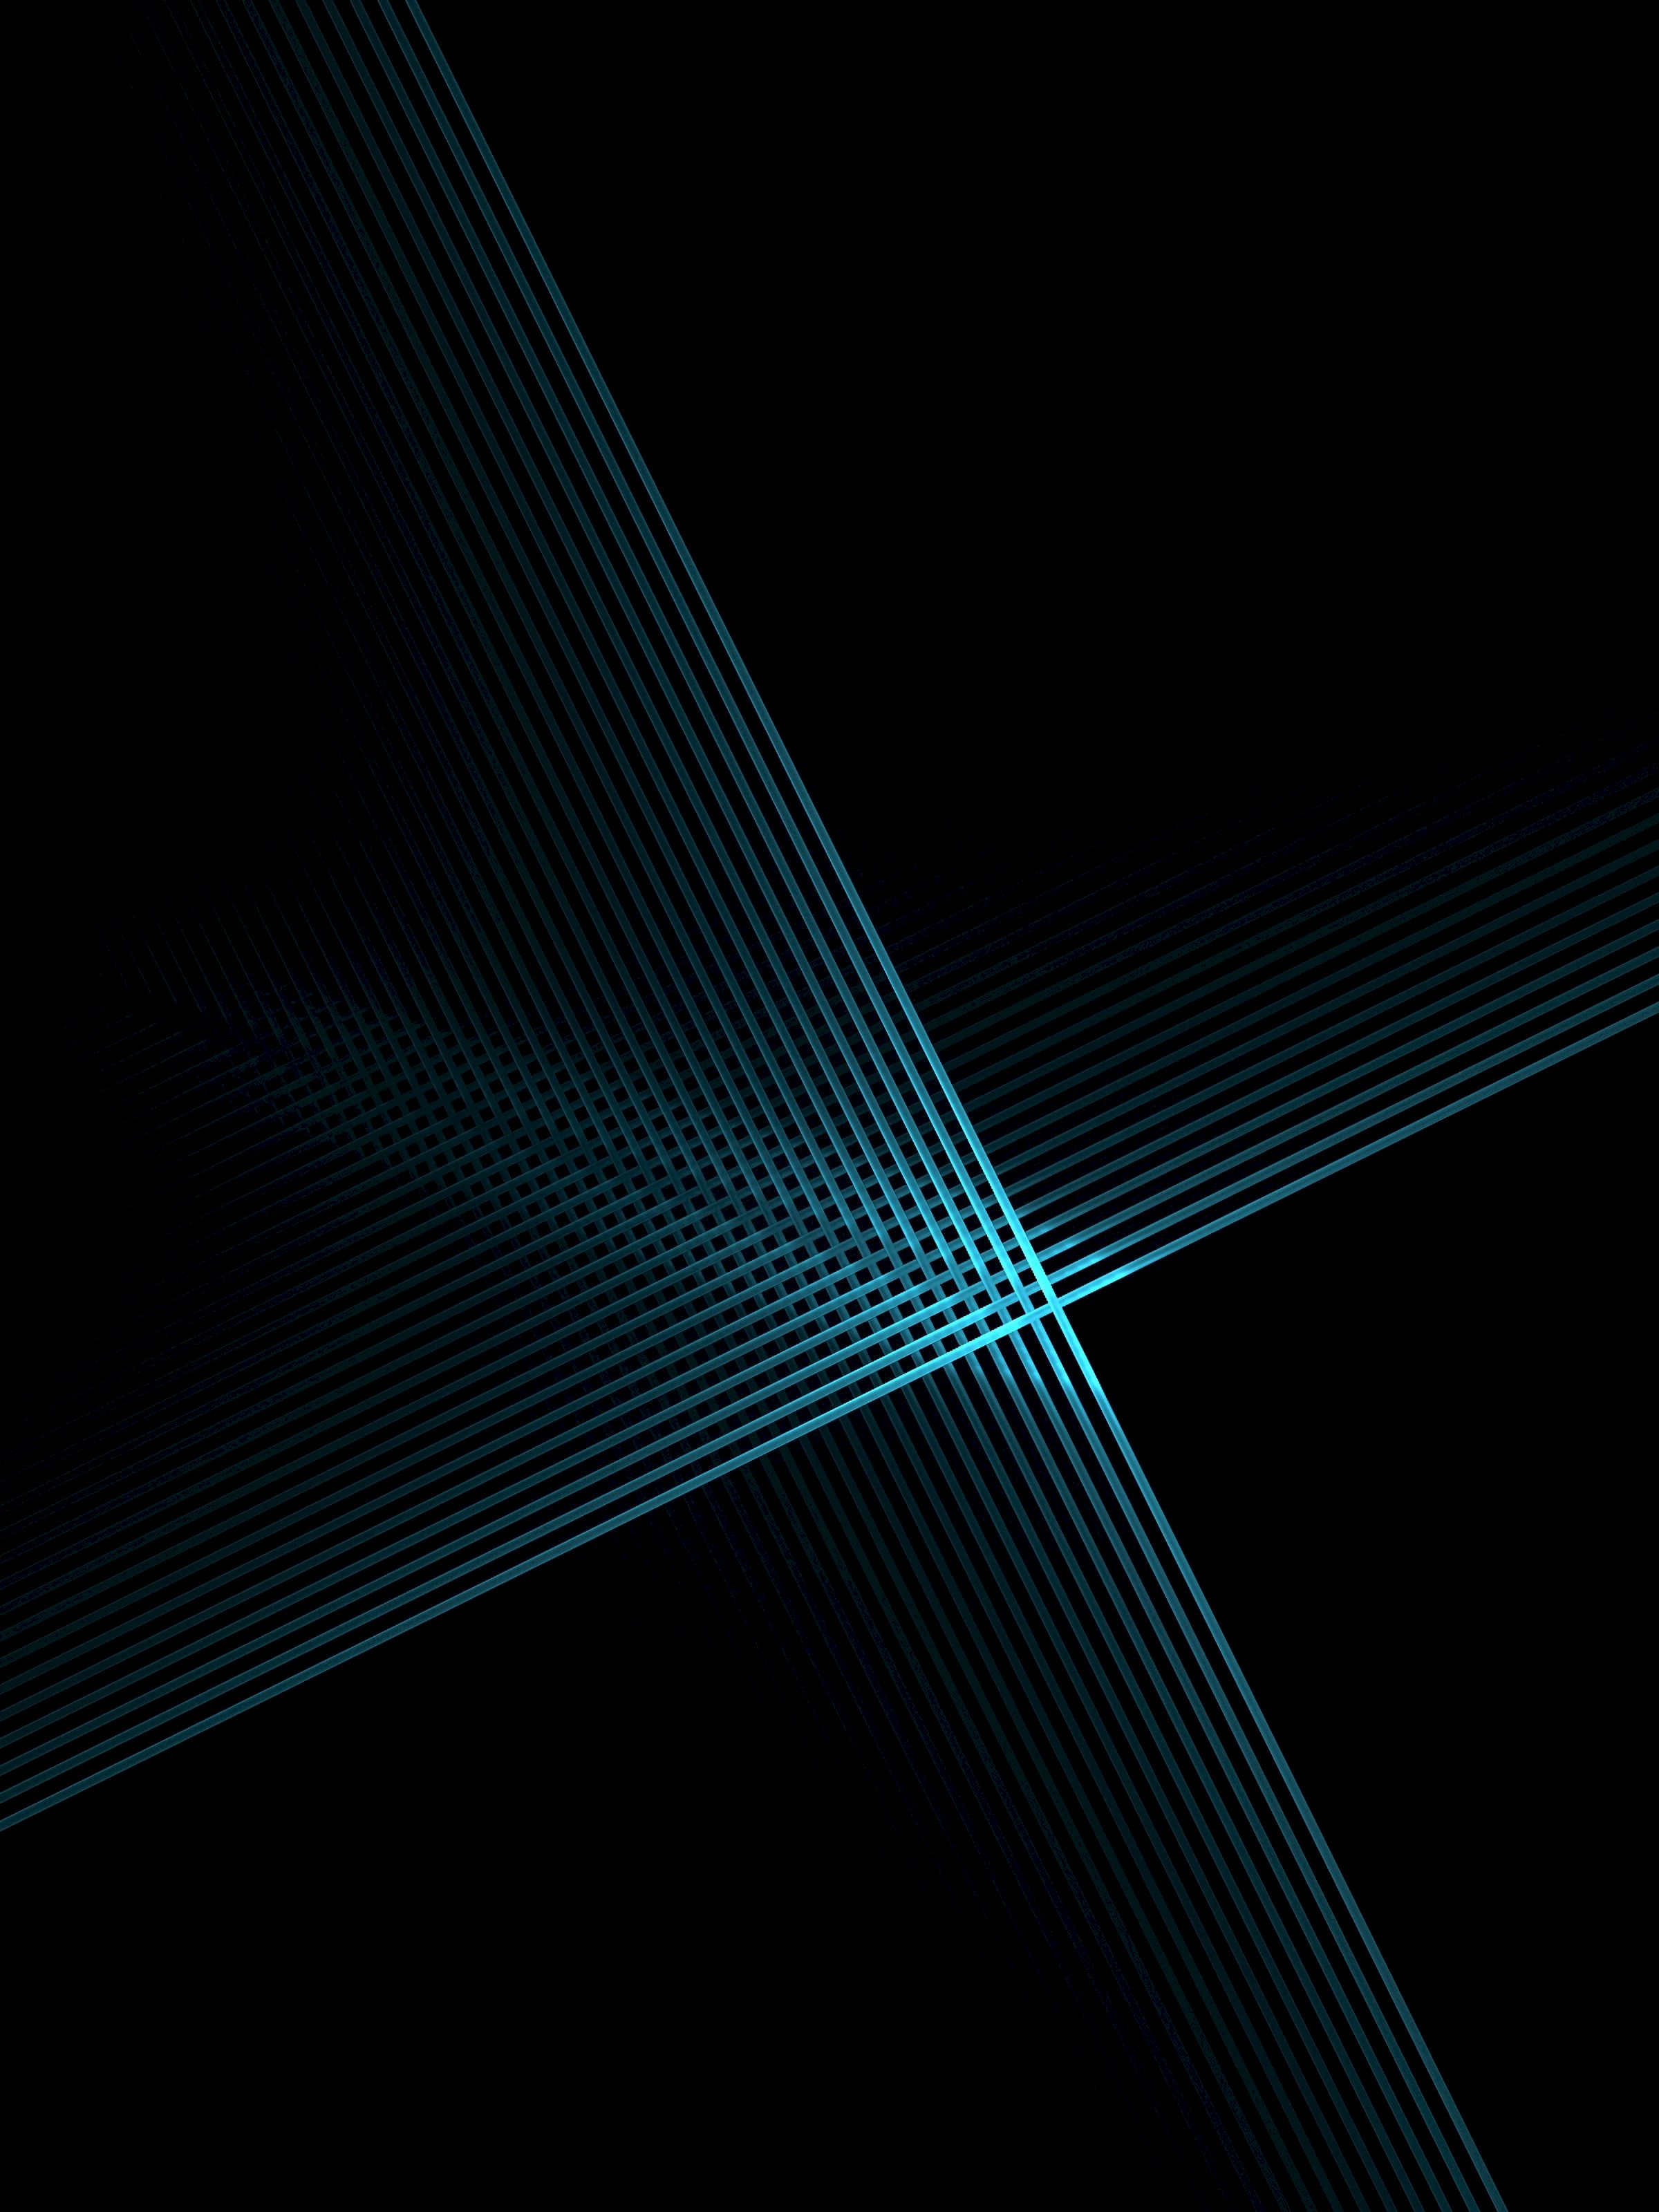 lines, abstract, dark, grid, weave 2160p